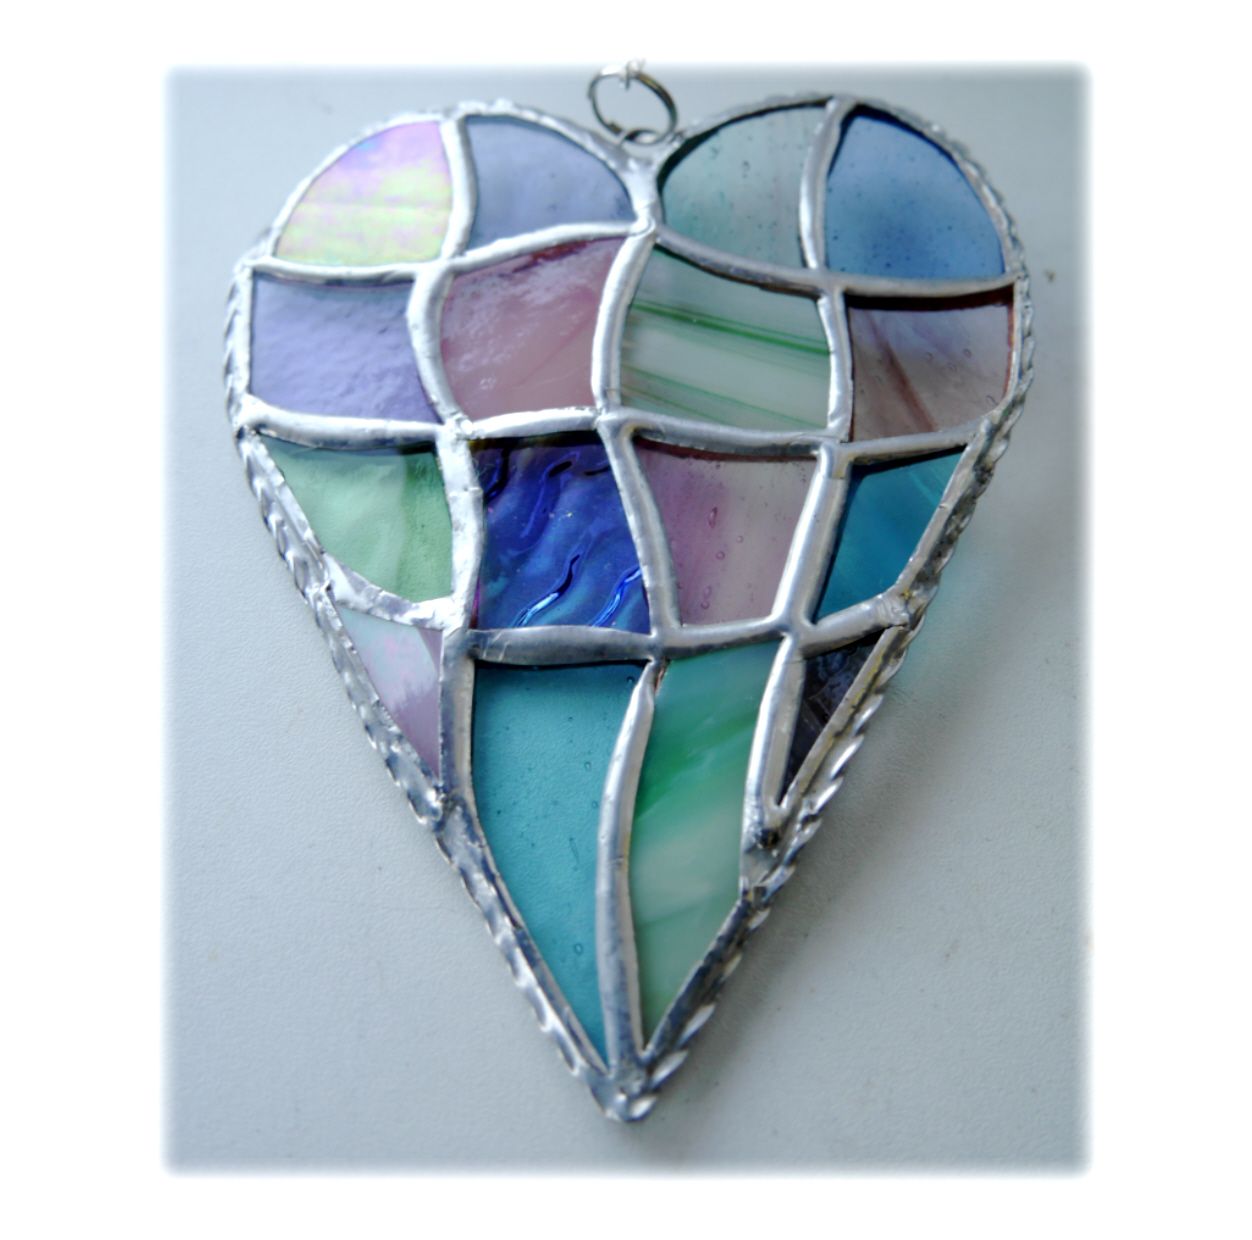 Patchwork Heart 041 Pastel #1905 FREE 16.00